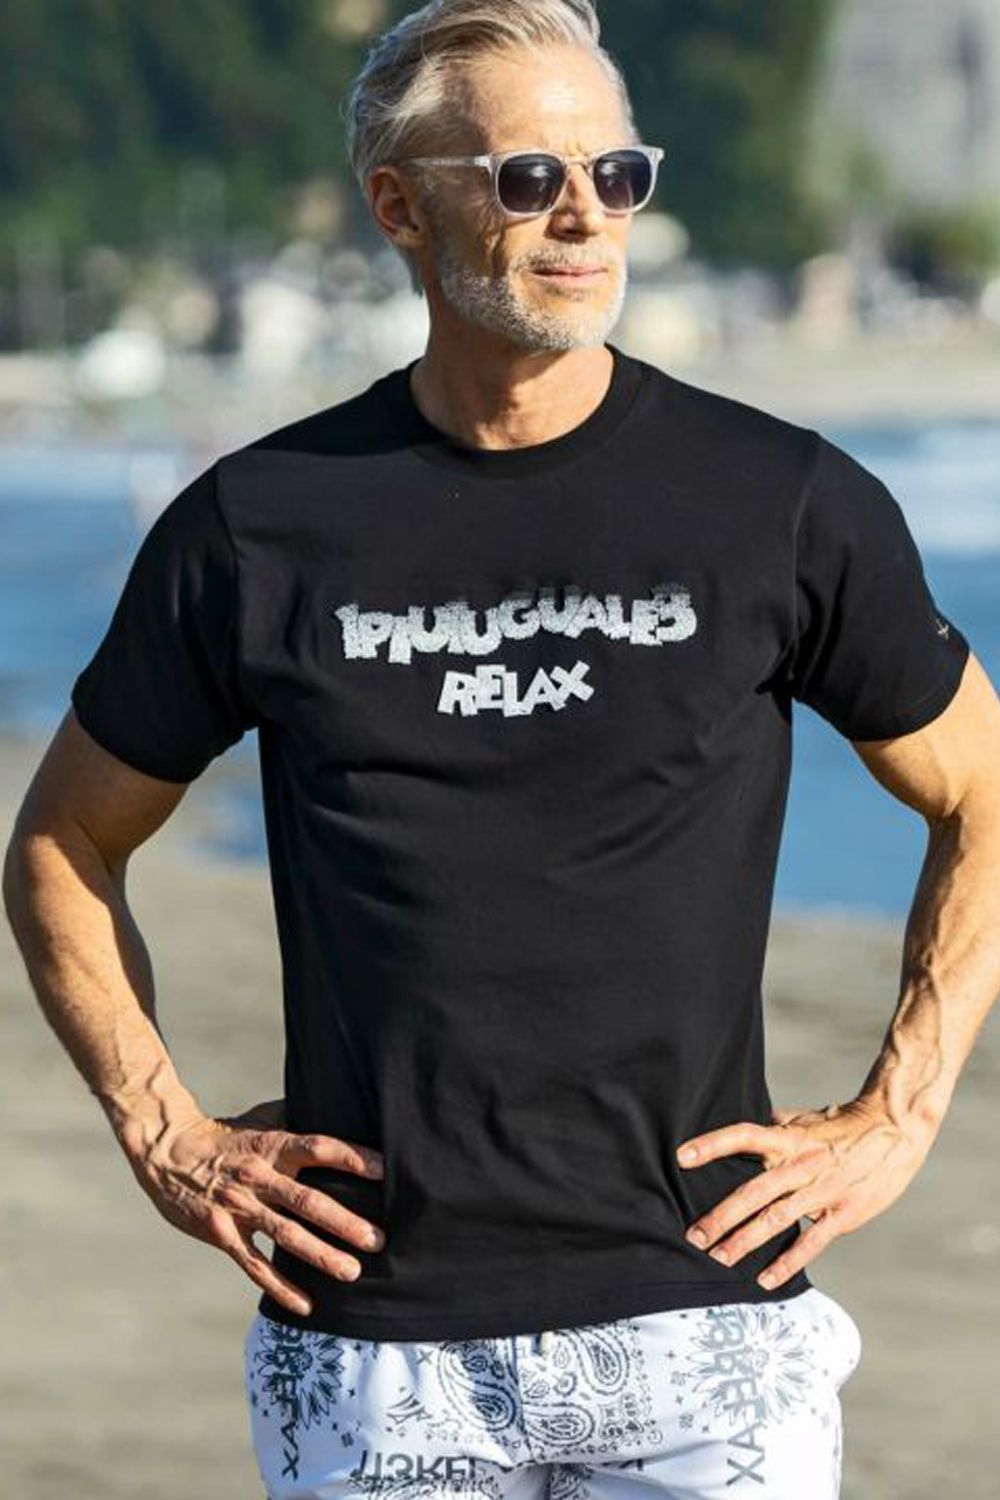 1PIU1UGUALE3 RELAX - GRADATION TOOTHBRUSH EMBROIDERY T-SHIRTS